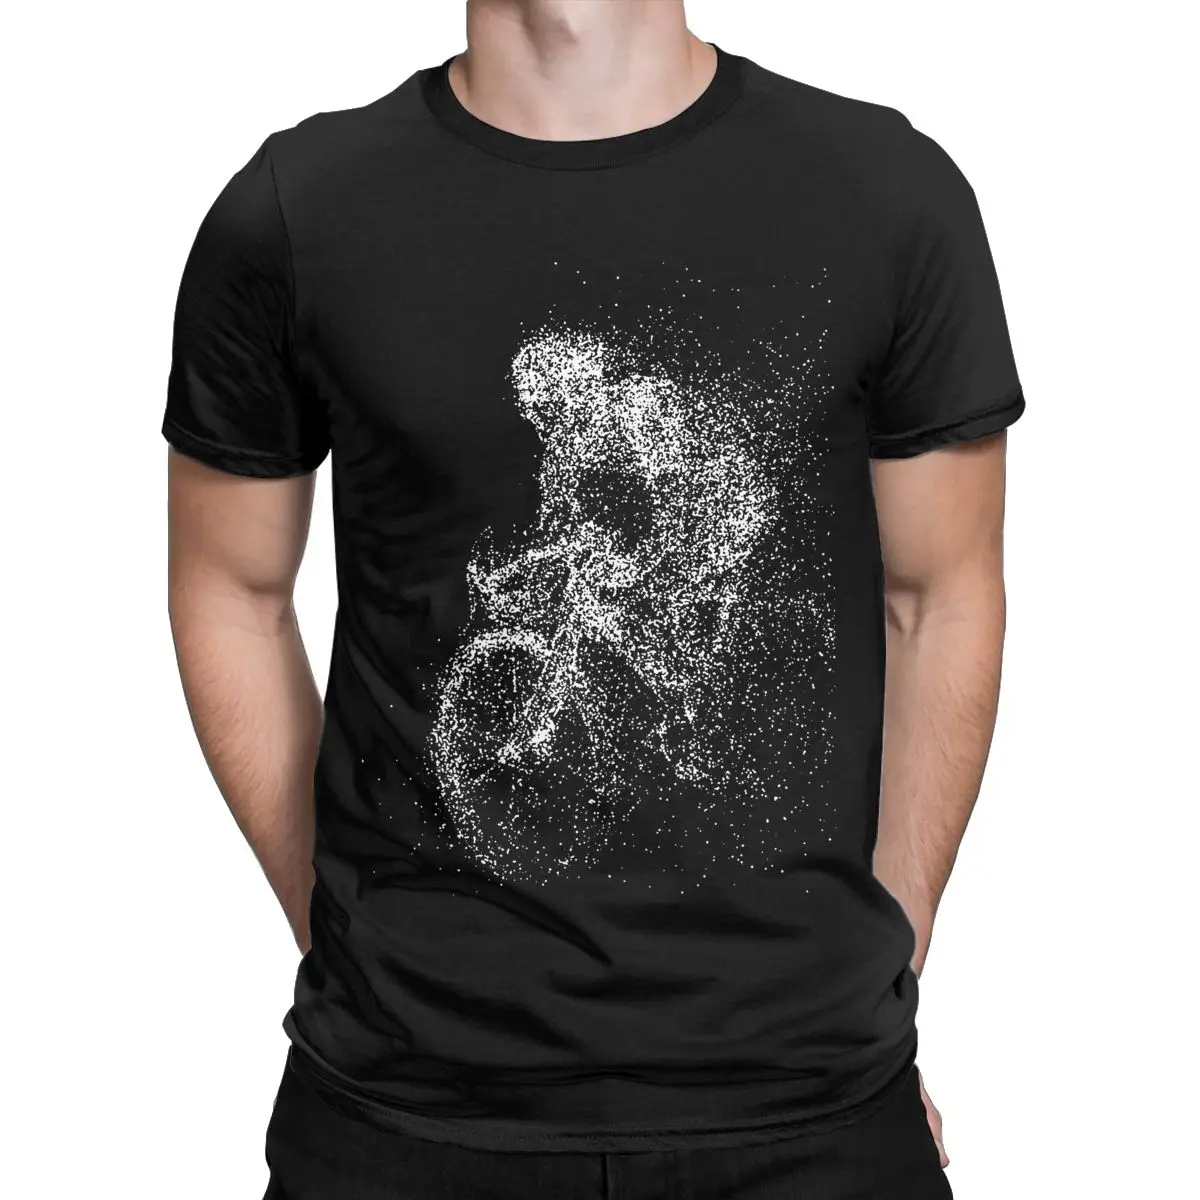 

CYCLE BICYCLE Biking Boy Cyclist Particles Shattered Tee Mug Sticker Notebook For Gift Essential for men Cotton Novelty T-Shirt